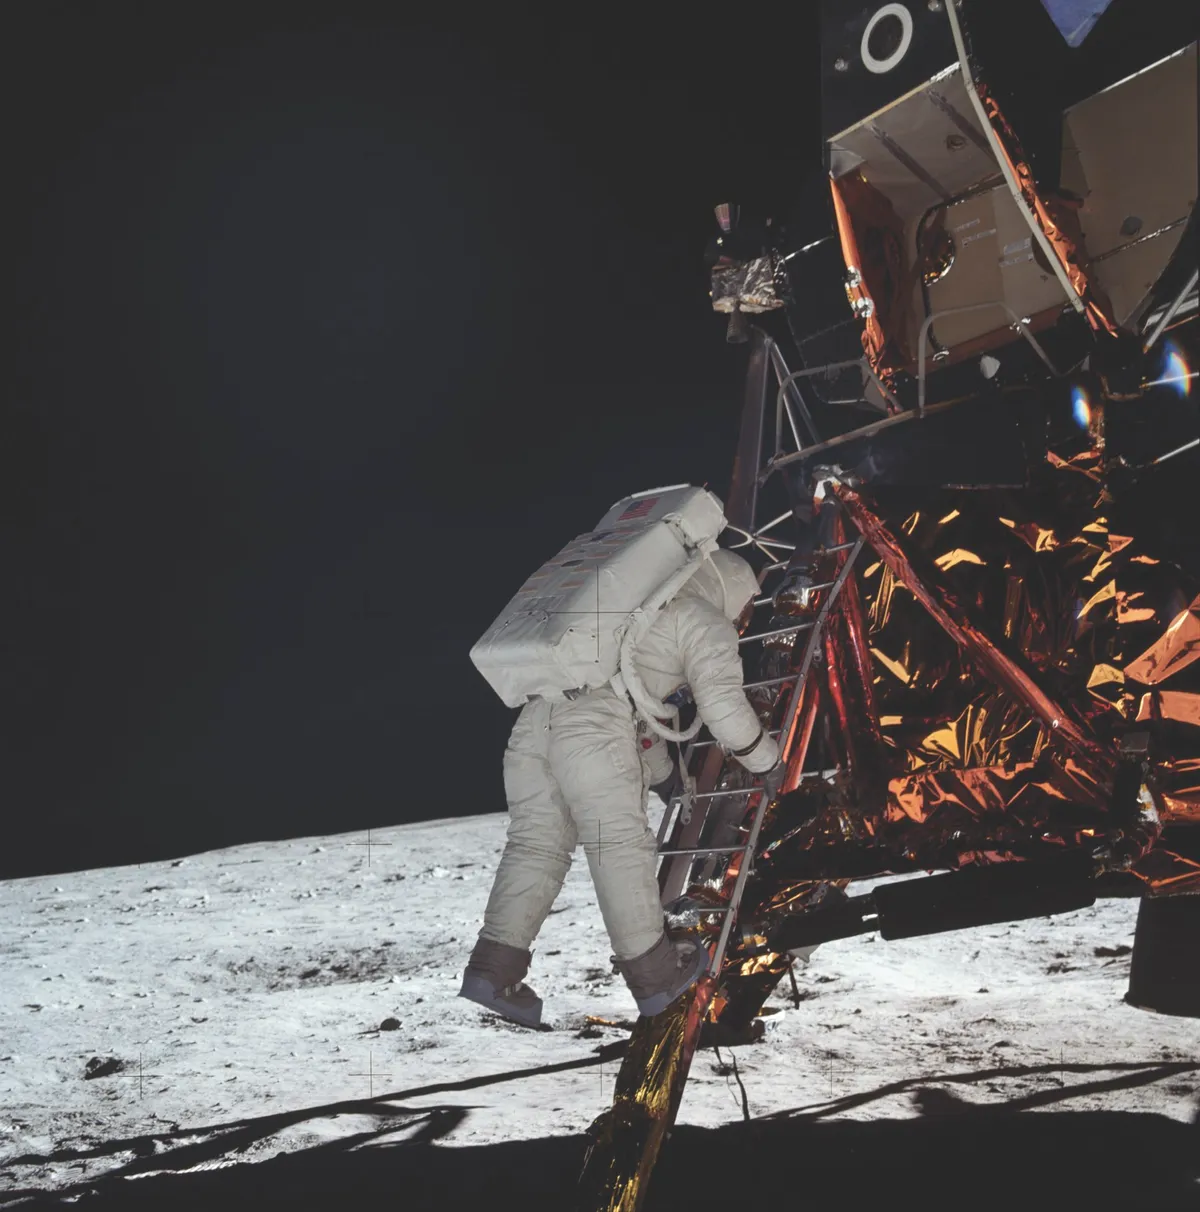 Half an hour after stepping out of the lunar module, Armstrong captures shots of his crew-mate Aldrin making the same feet-first exit onto the Moon. It takes Aldrin three minutes to make it to the bottom of the lunar module’s ladder. © NASA/JPL